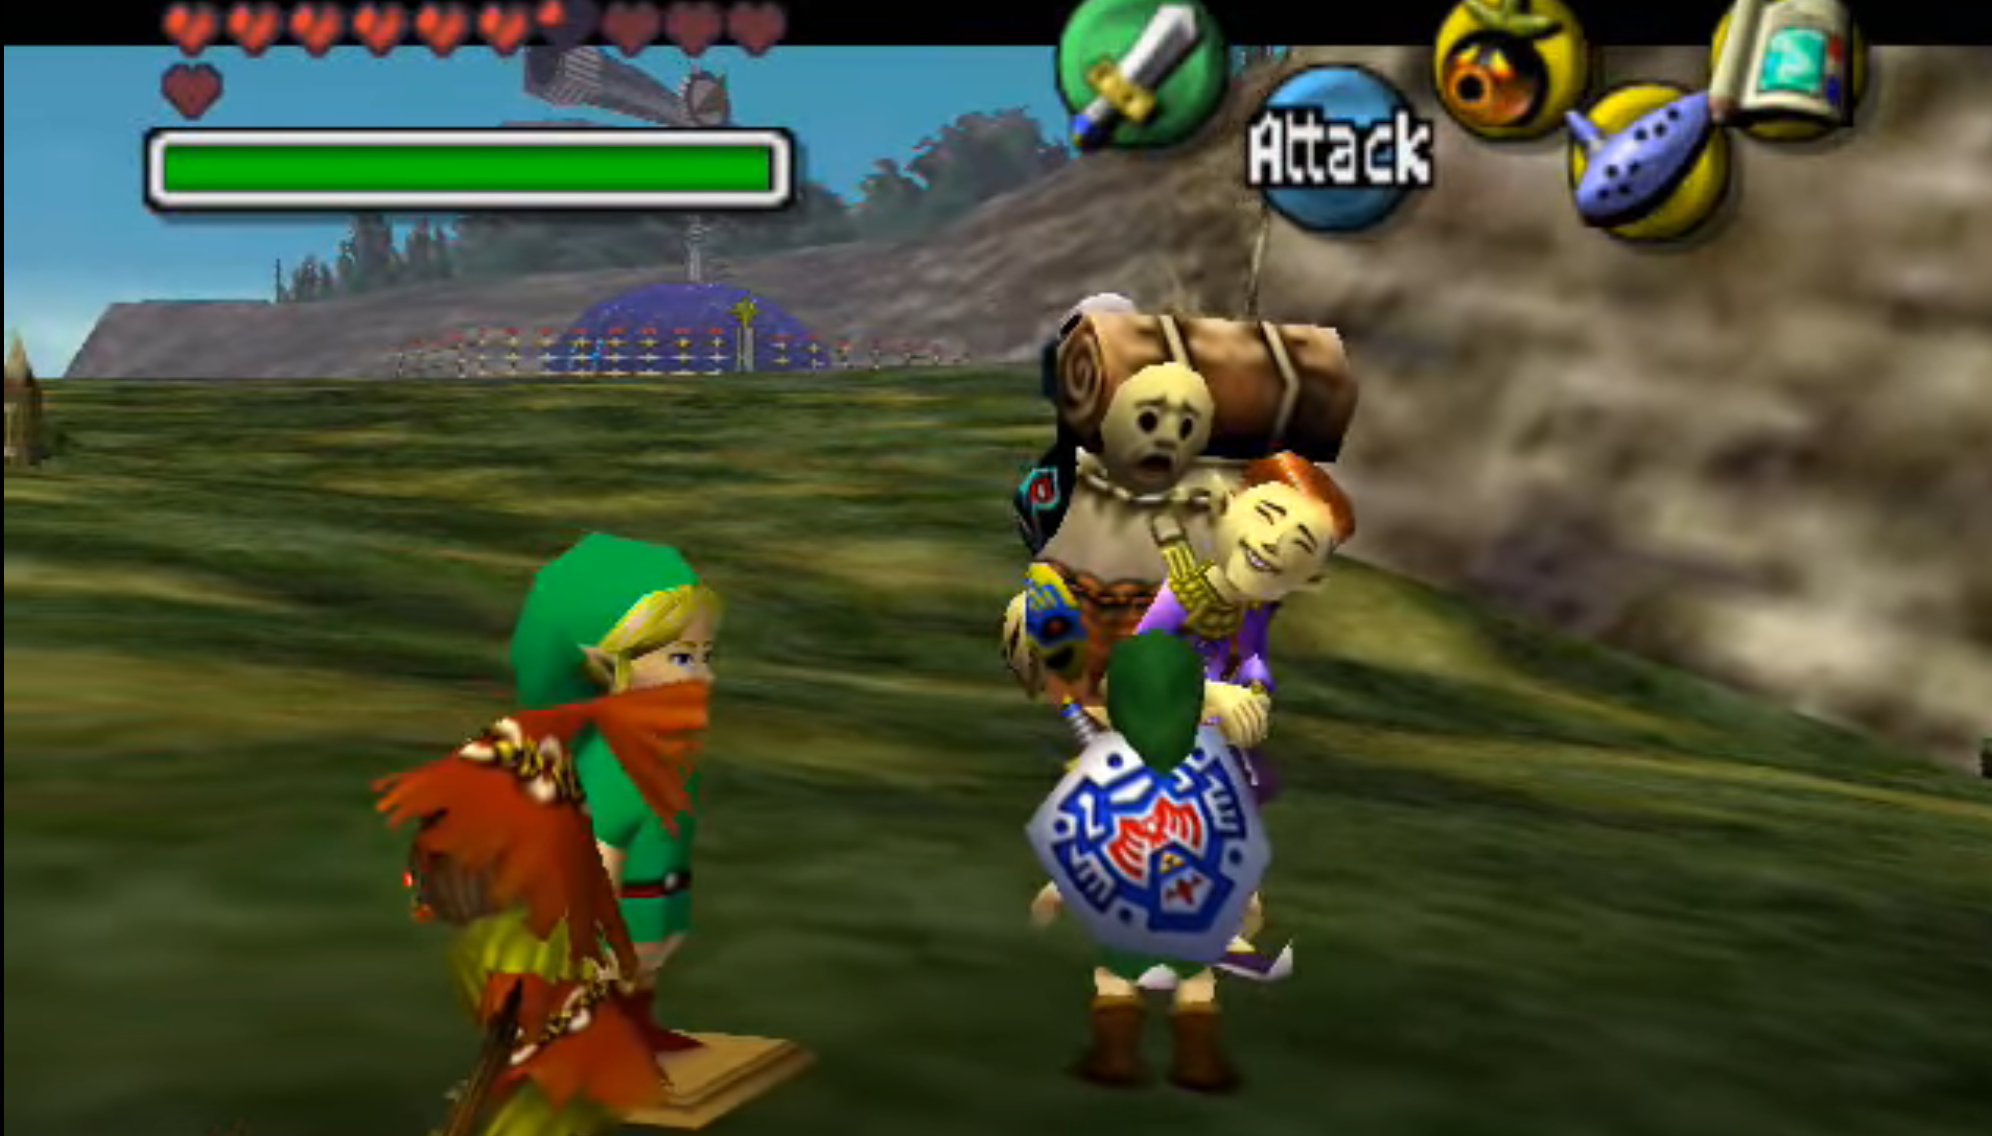 A screenshot from the BEN.wmv video where the Happy Mask Salesman's head follows the player controlled Link wherever he moves.